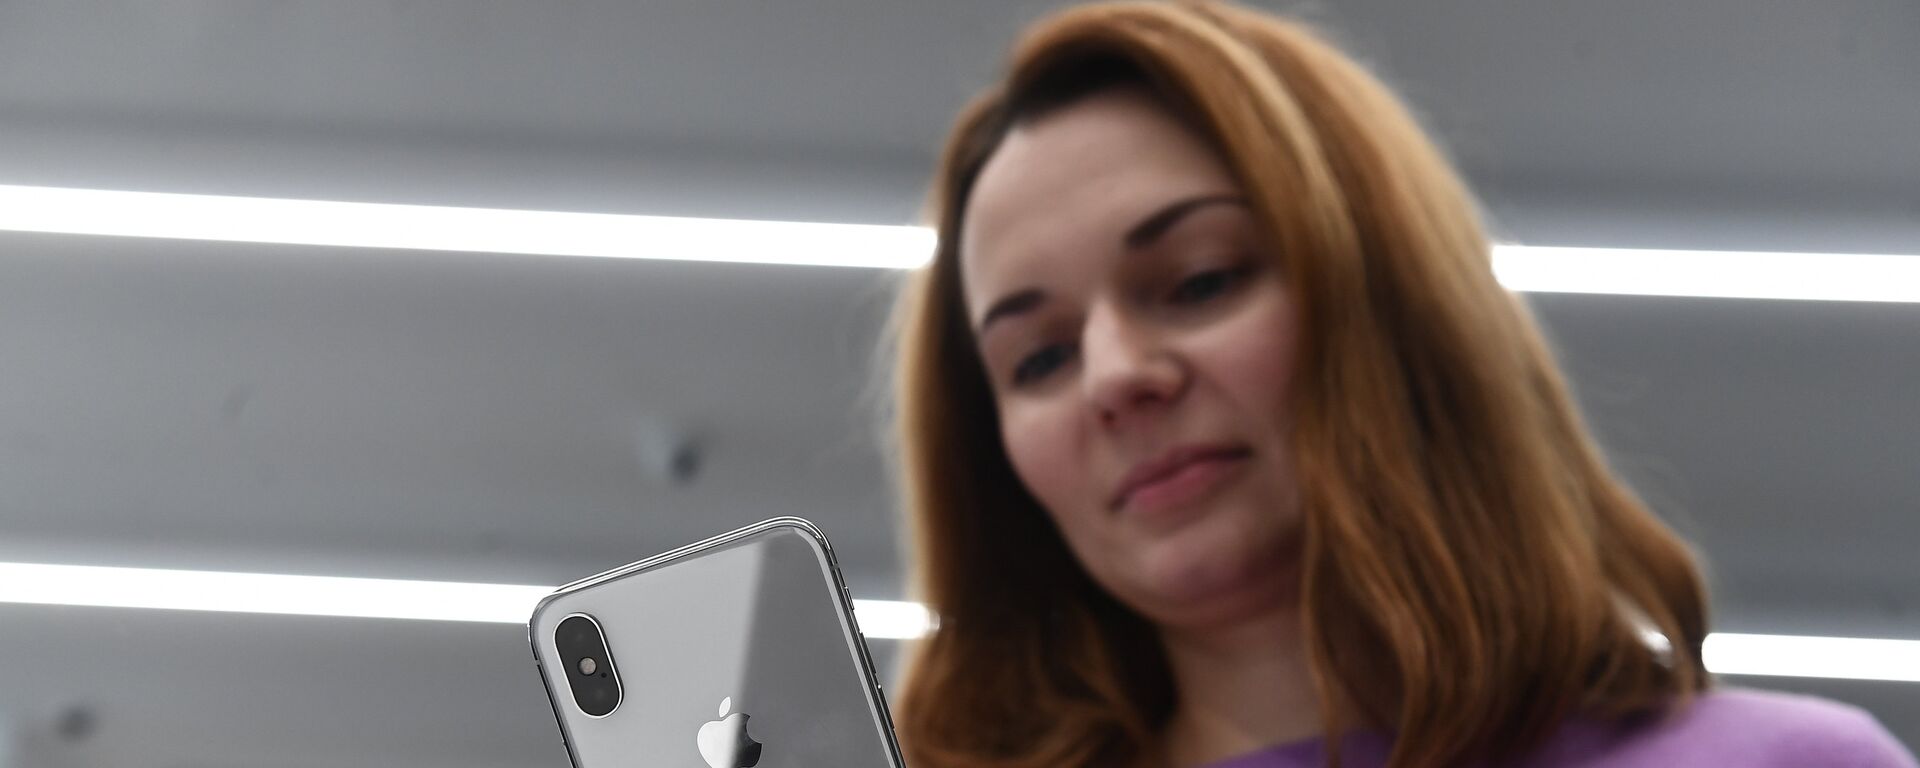 A buyer examines a new smartphone iPhone X in re:Store mobile equipment store on Tverskaya Street in Moscow - Sputnik International, 1920, 01.06.2023